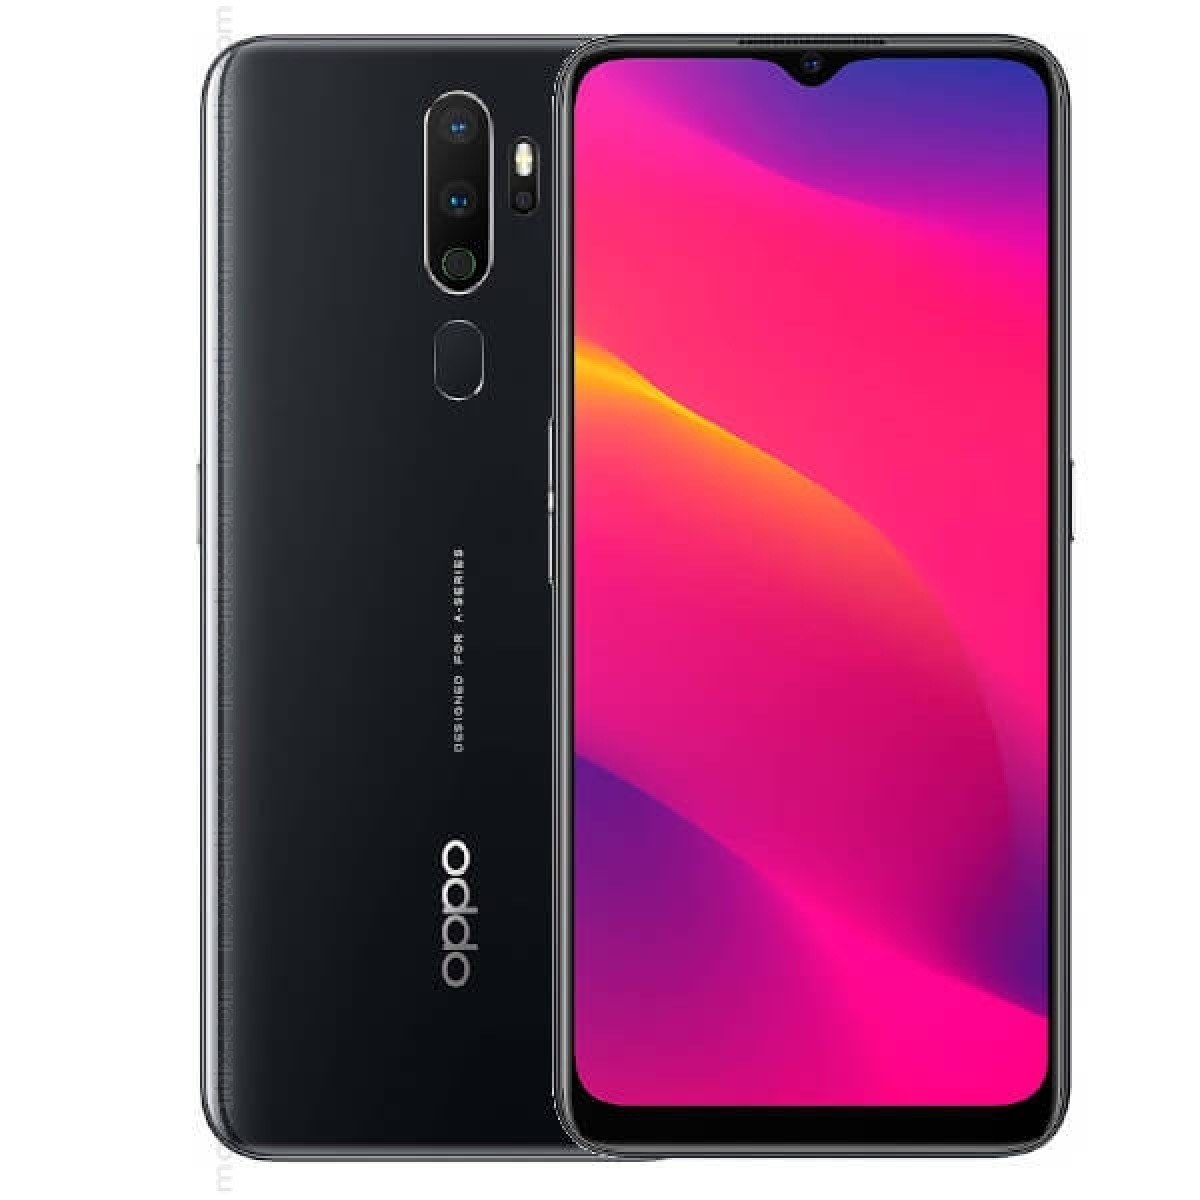 OPPO unveils 3GB version of A5 2020